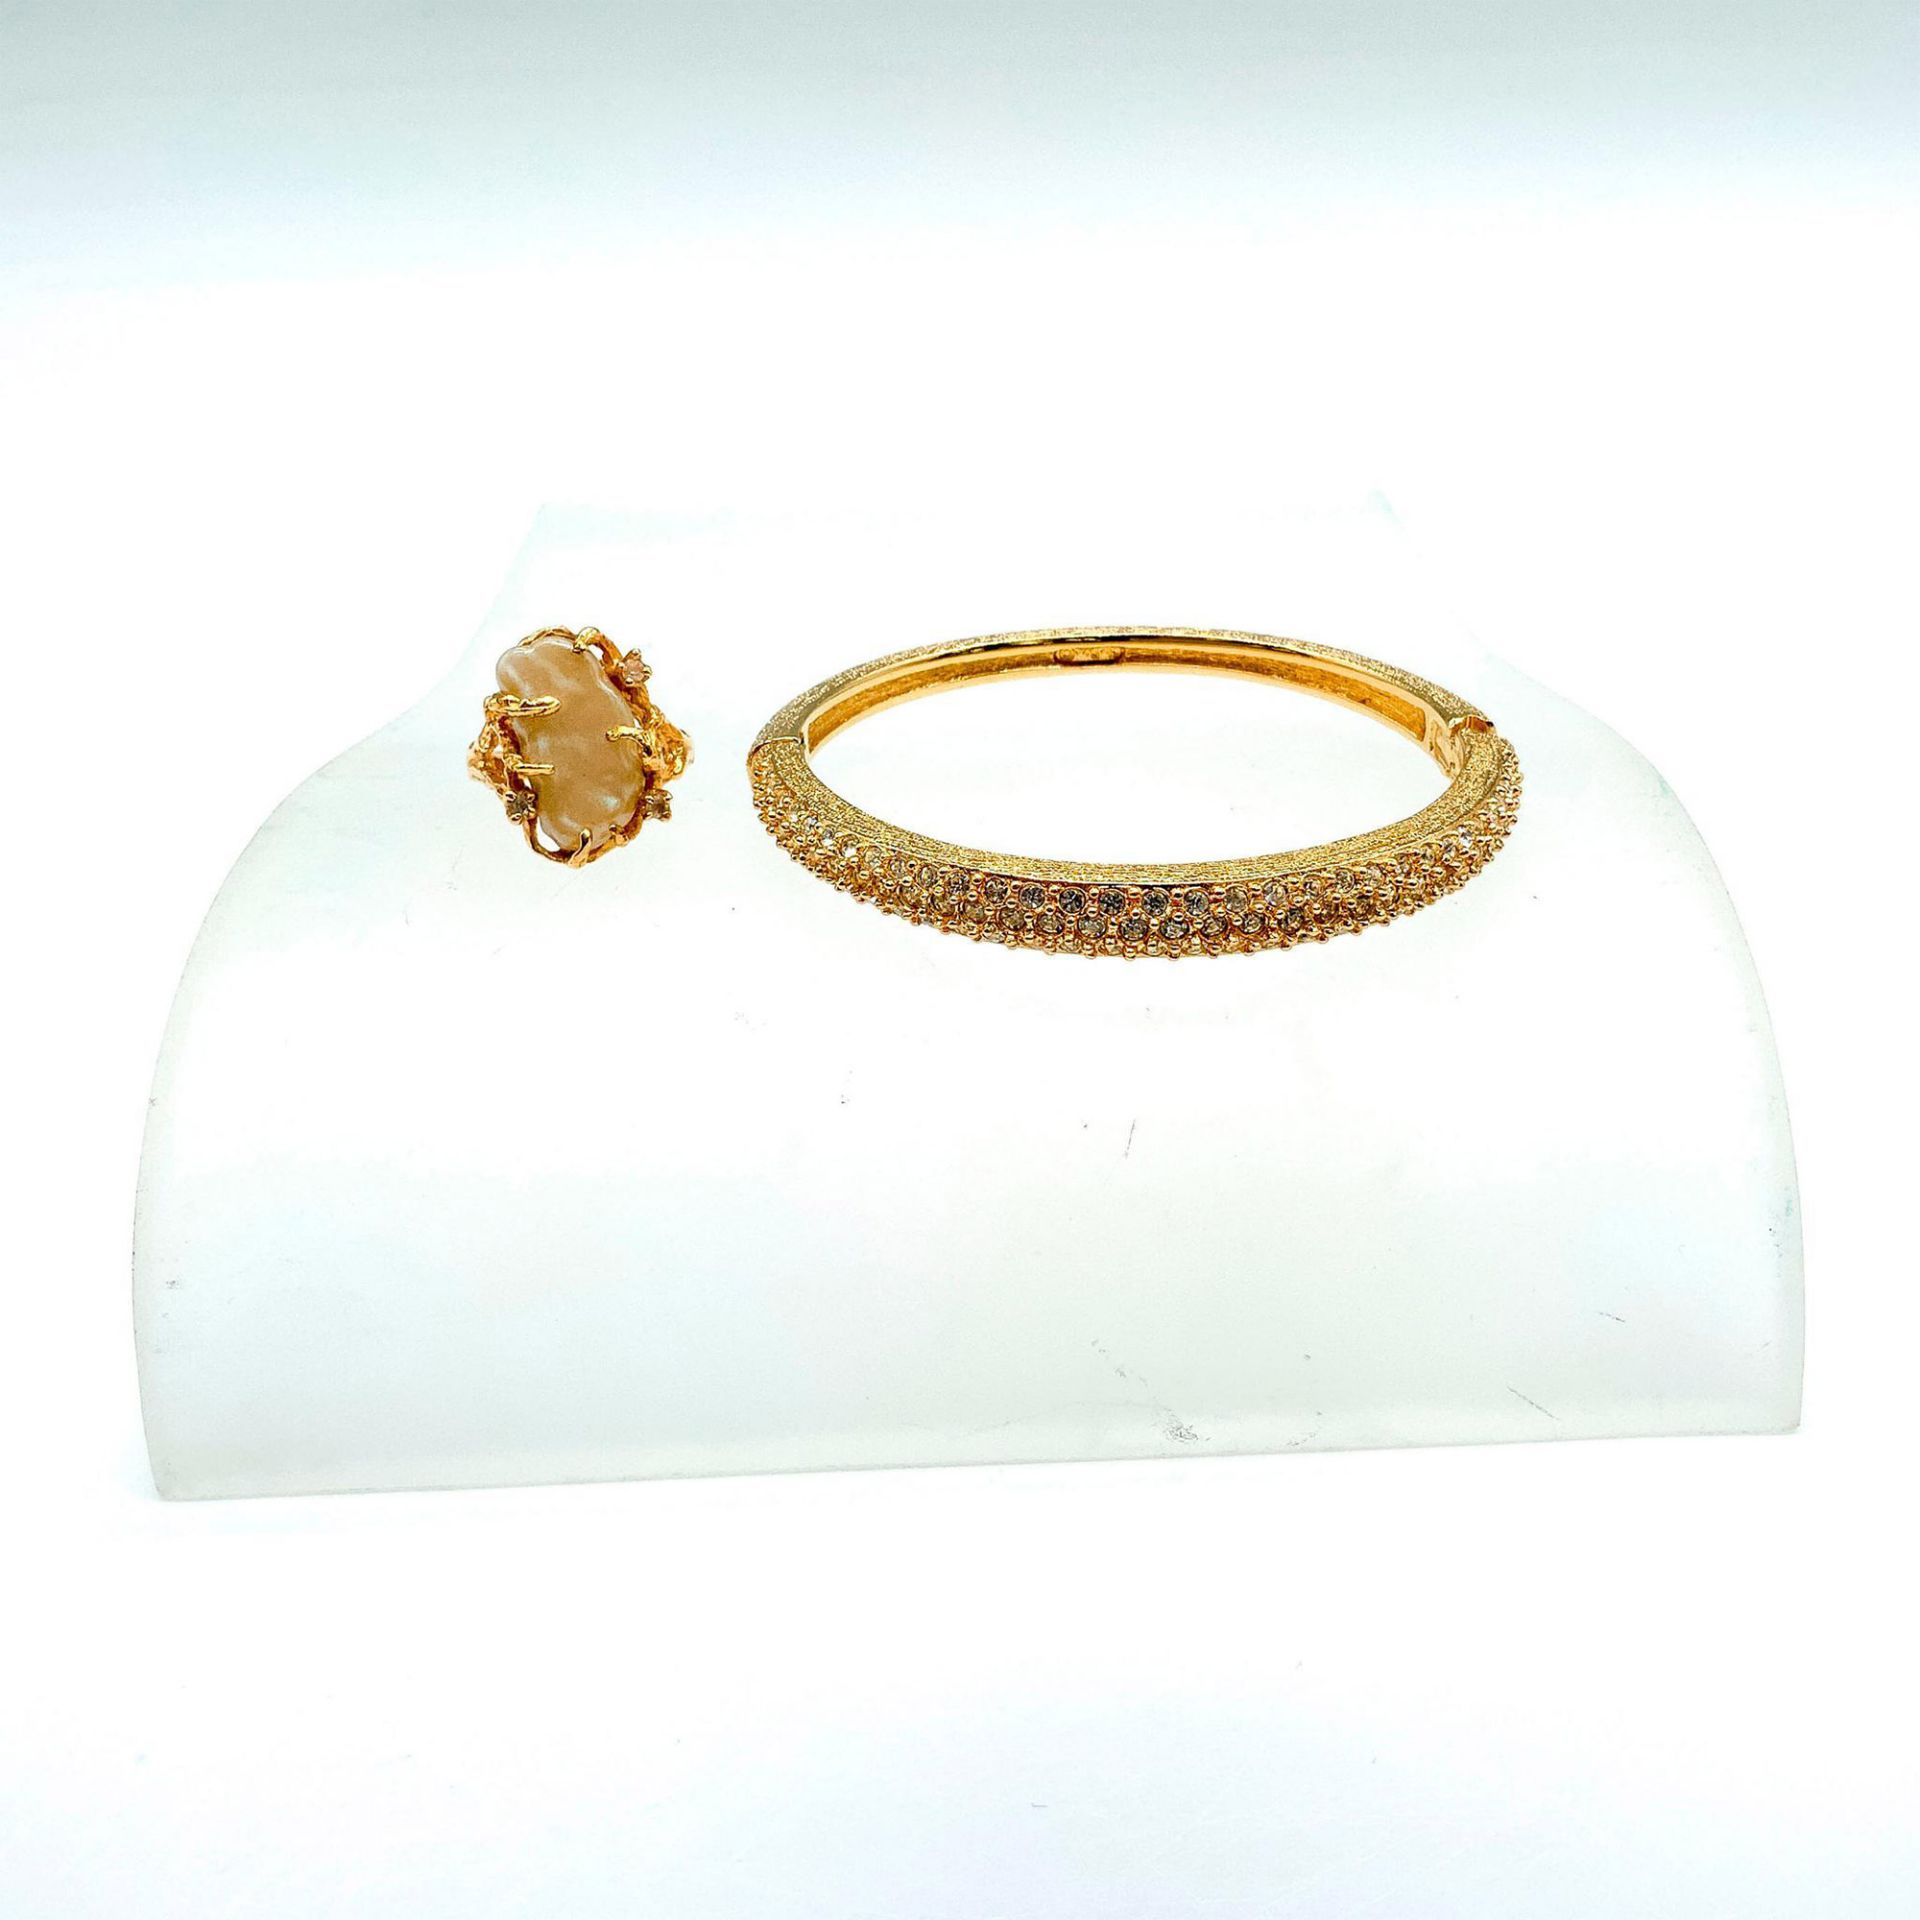 2pc Christian Dior Elegant Gold Plated Crystal Bracelet and Ring - Image 2 of 2